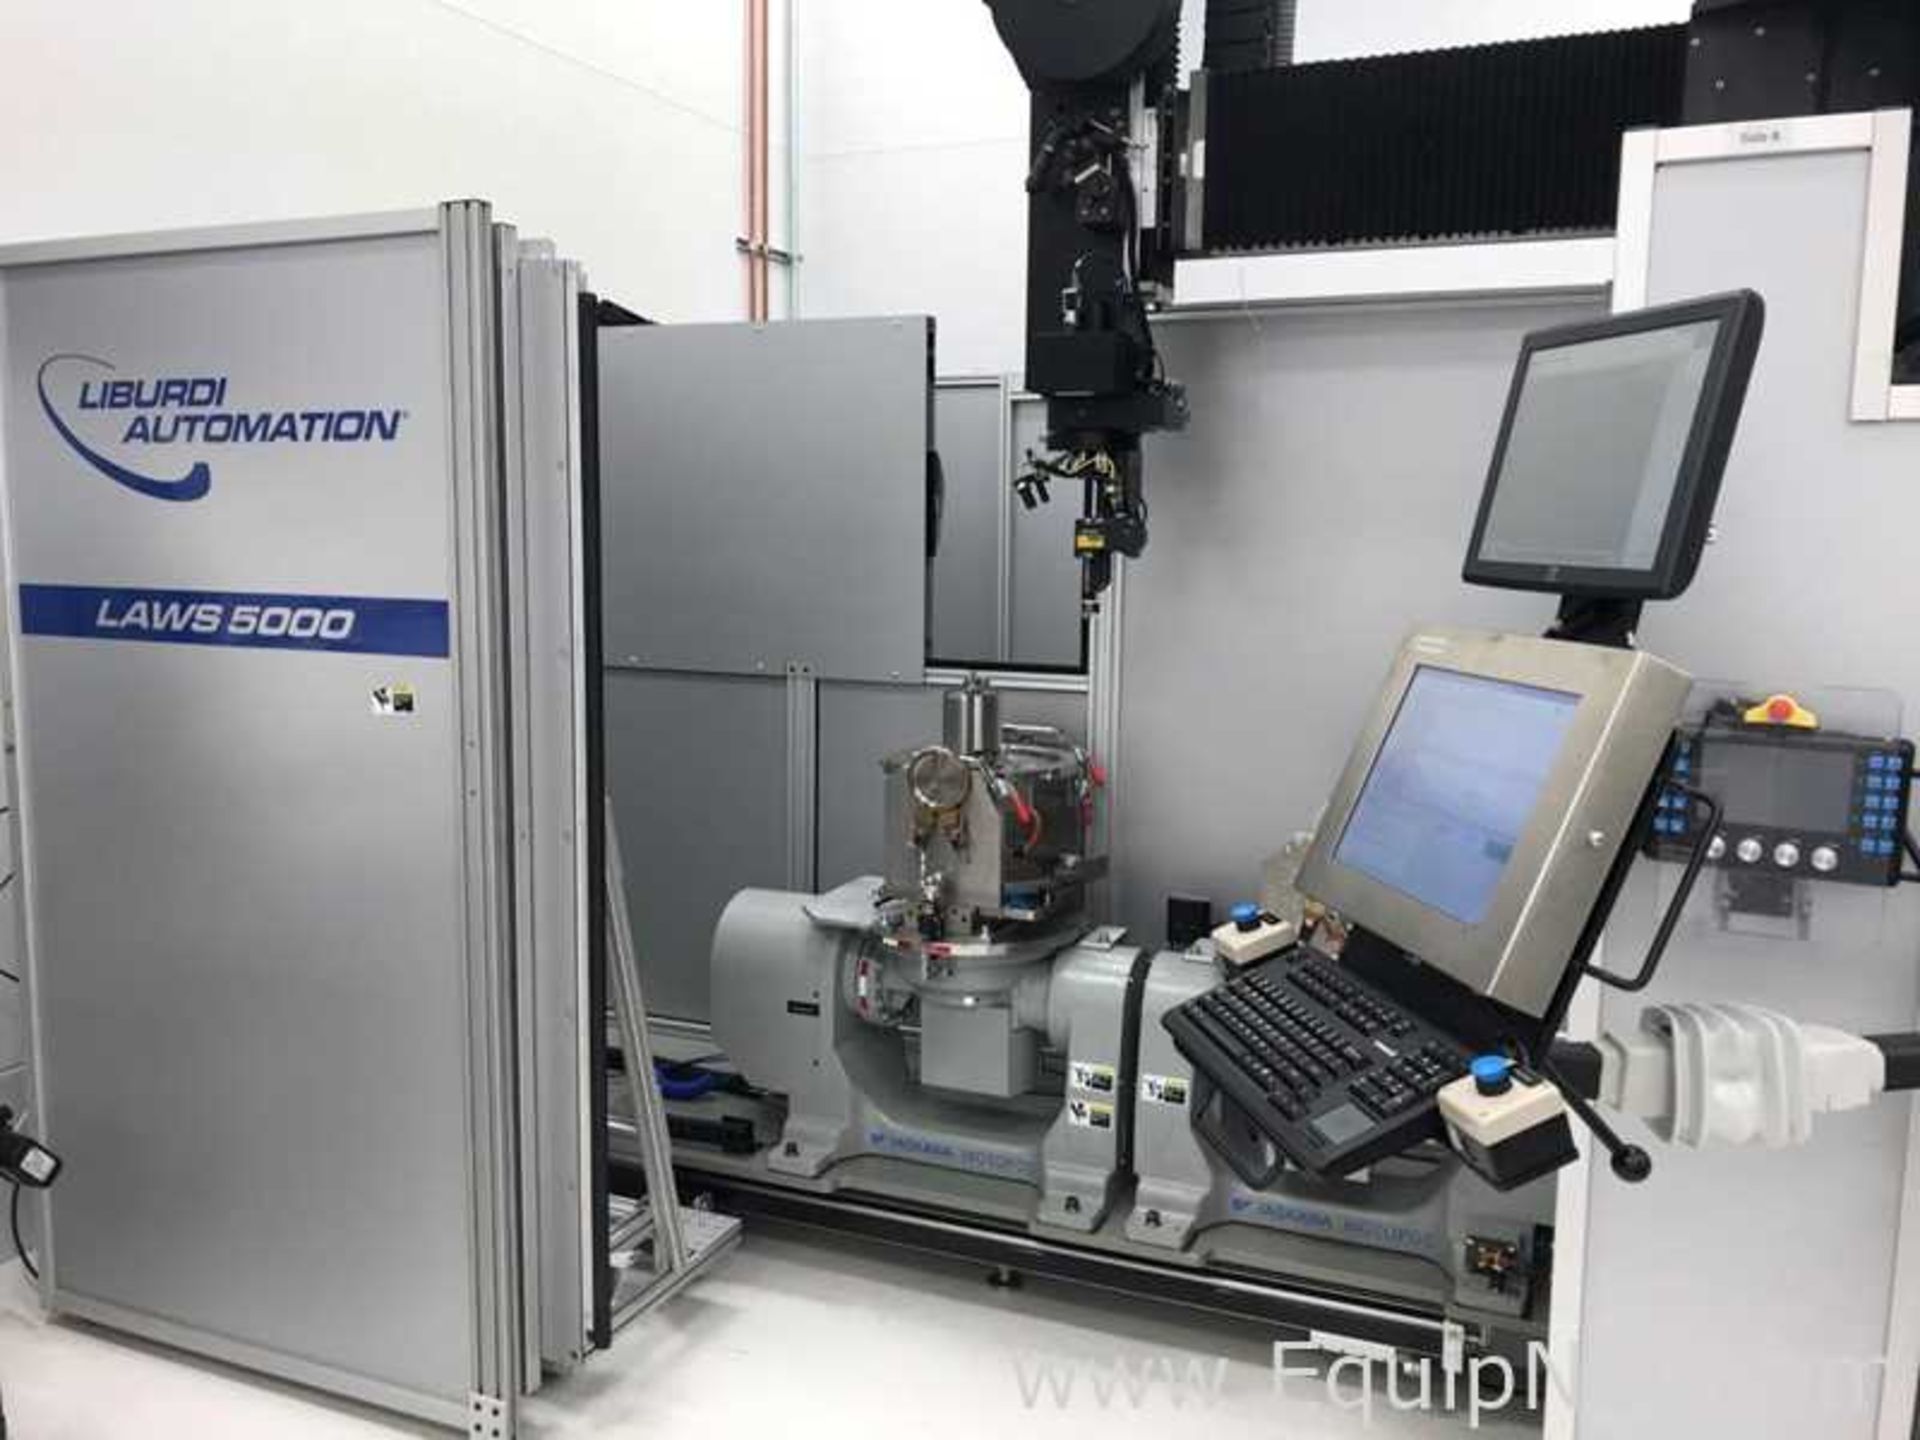 Liburdi Automation Laws 5000 Multi Axis Tig Welding Cell with 4 Yaskawa Robotic Positioners - Image 3 of 13